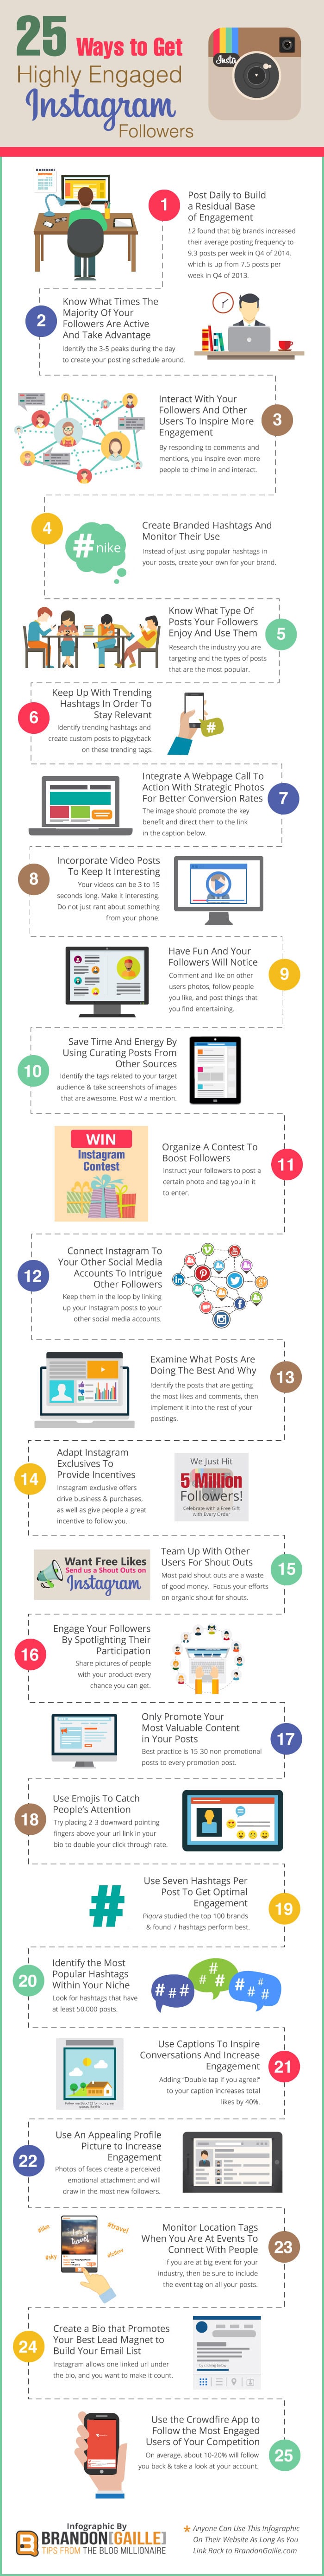 25 Ways To Get Highly Engaged Instagram Followers [Inforgraphic]